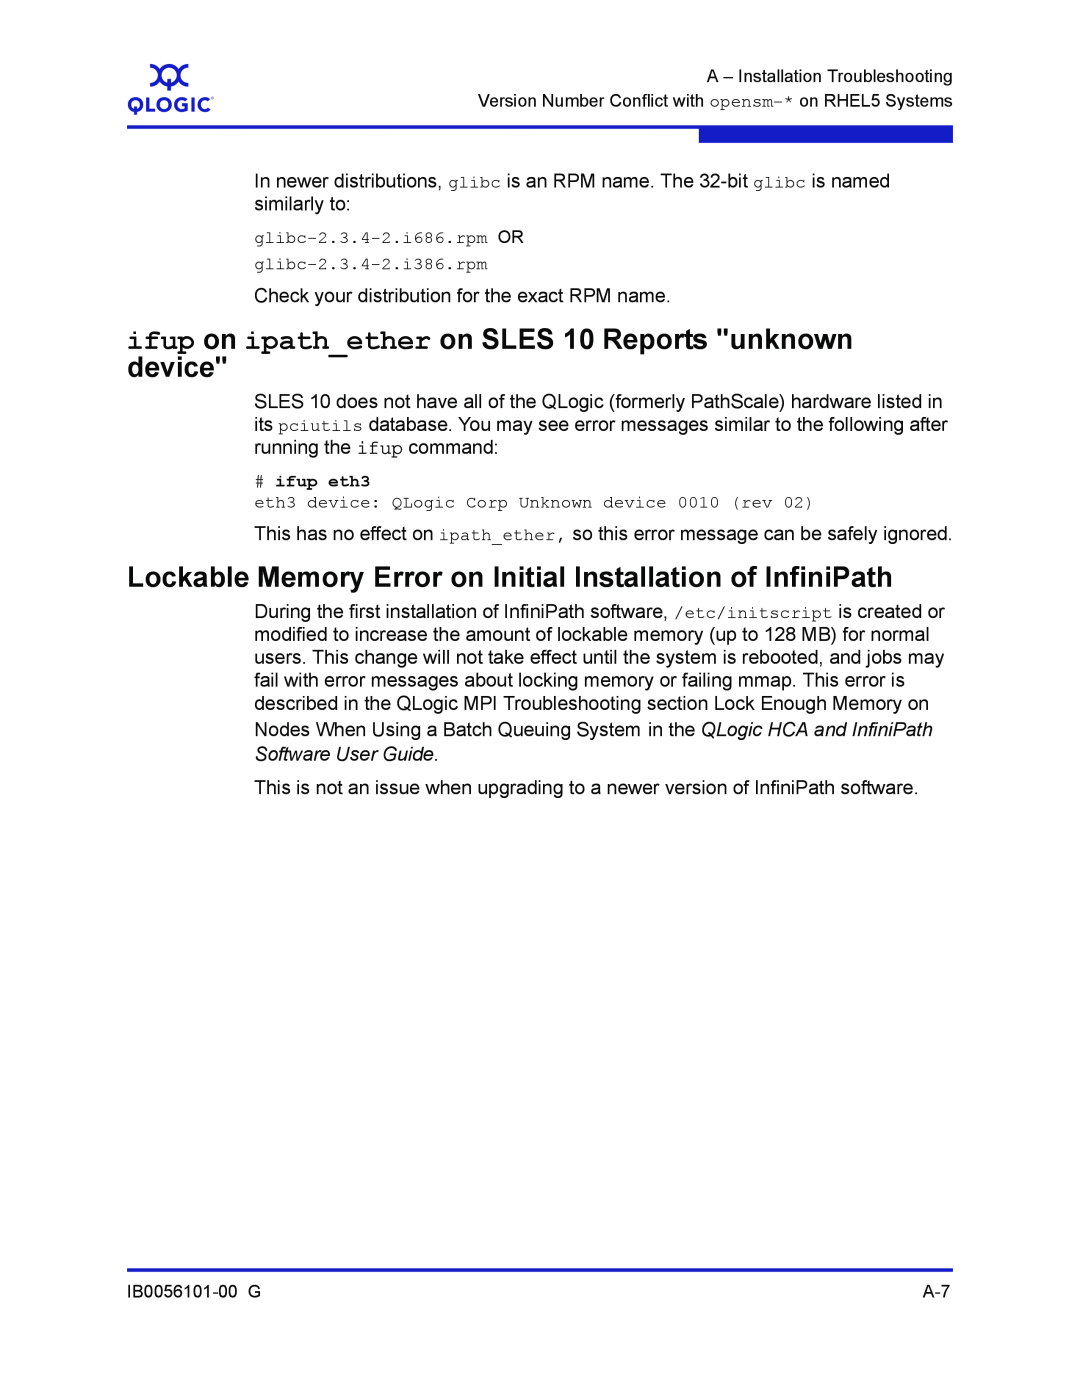 Q-Logic IB0056101-00 G manual ifup on ipathether on SLES 10 Reports unknown device, Software User Guide 